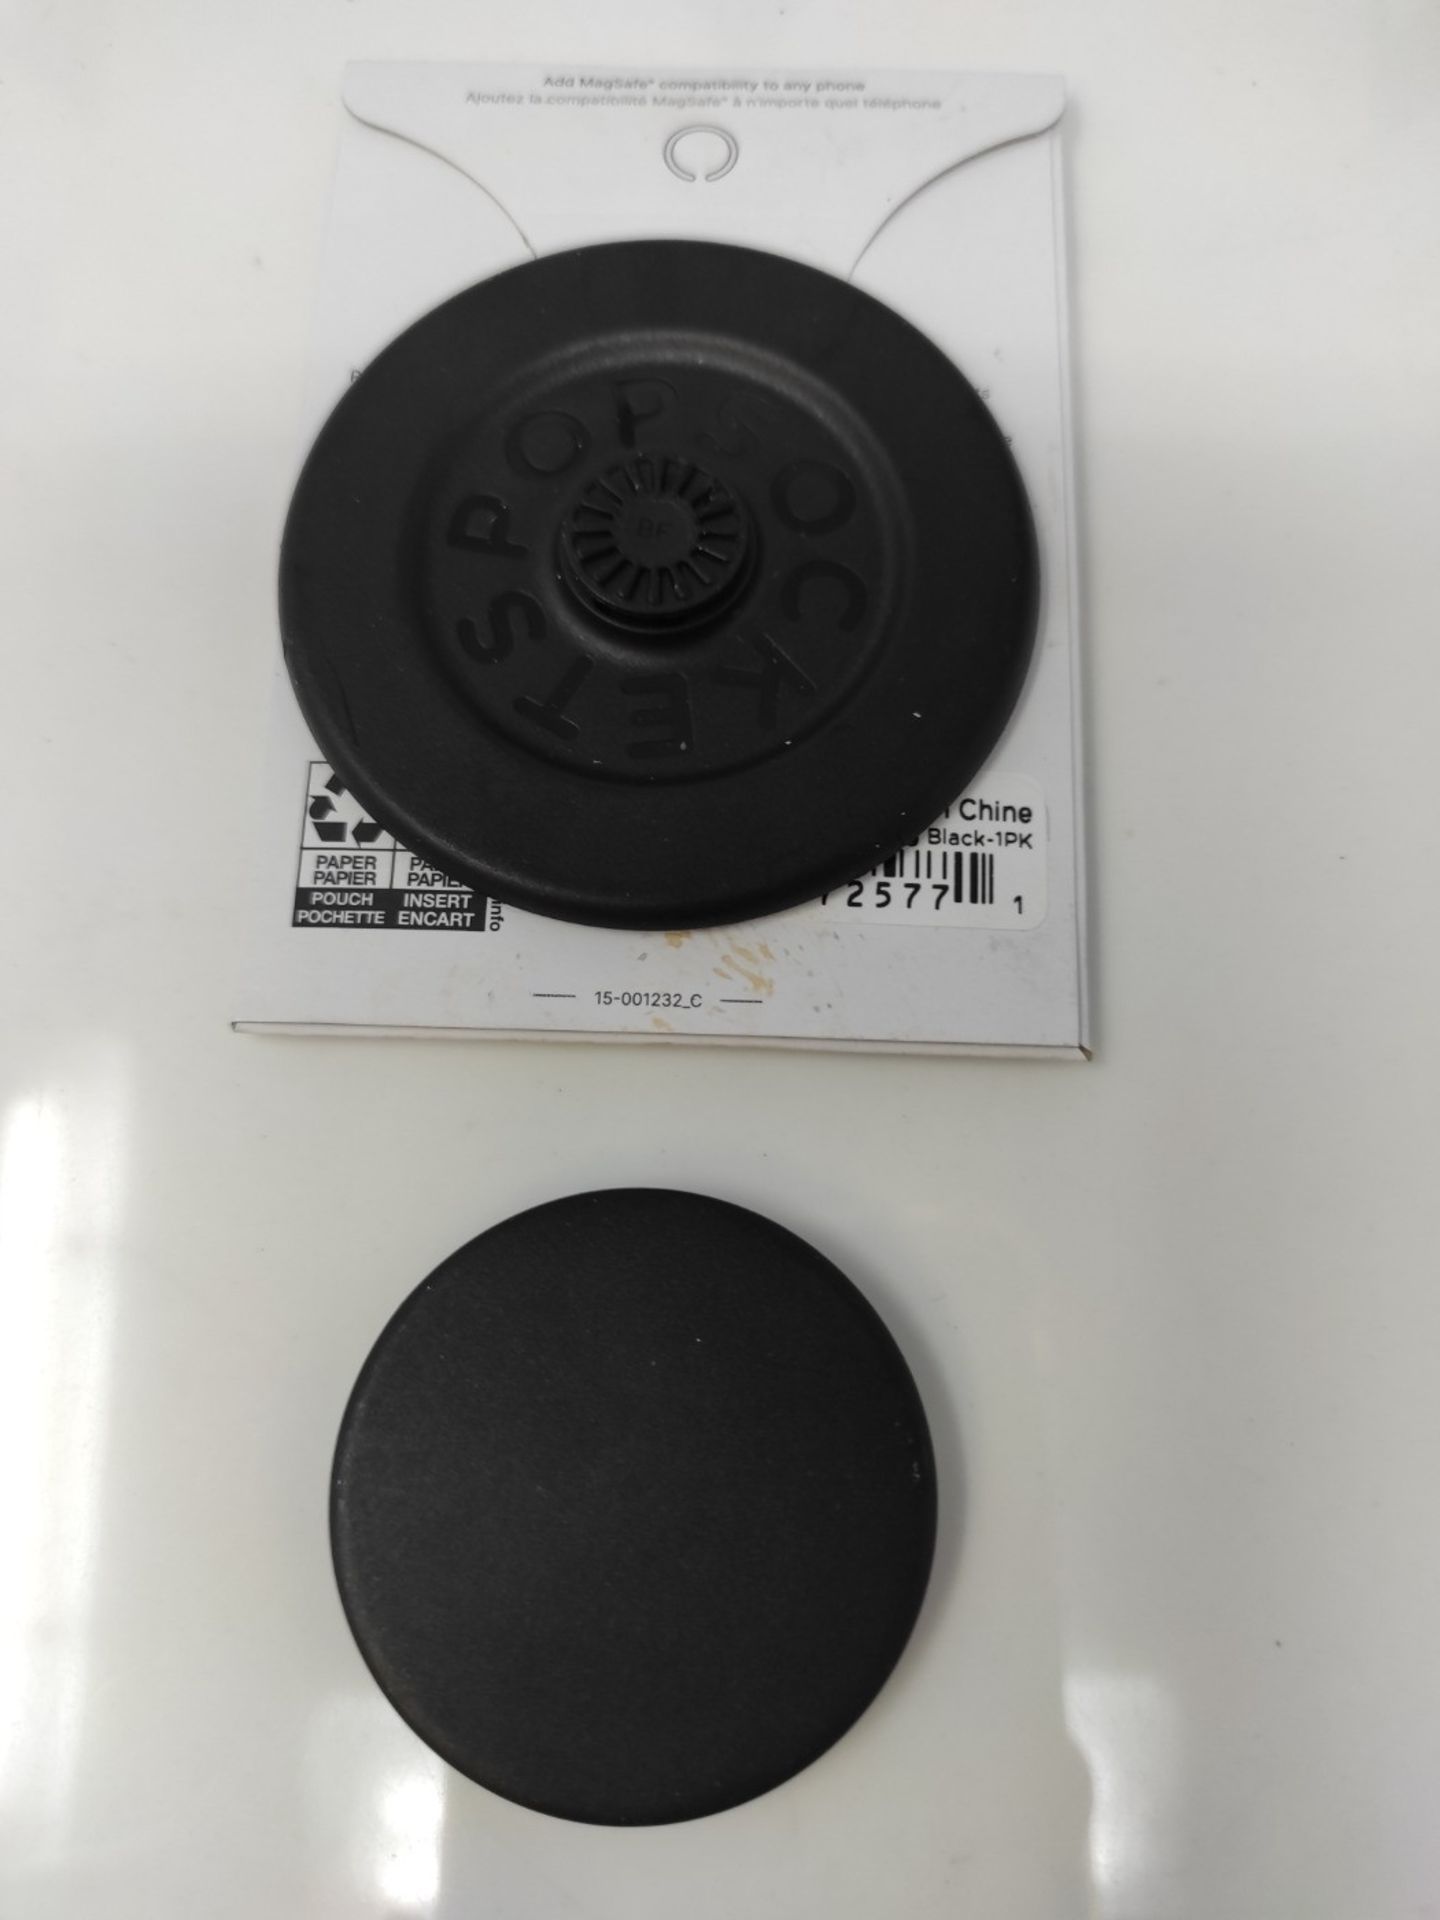 PopSockets: PopGrip Round for MagSafe - Adapter Ring for MagSafe Included - Expanding - Image 2 of 2